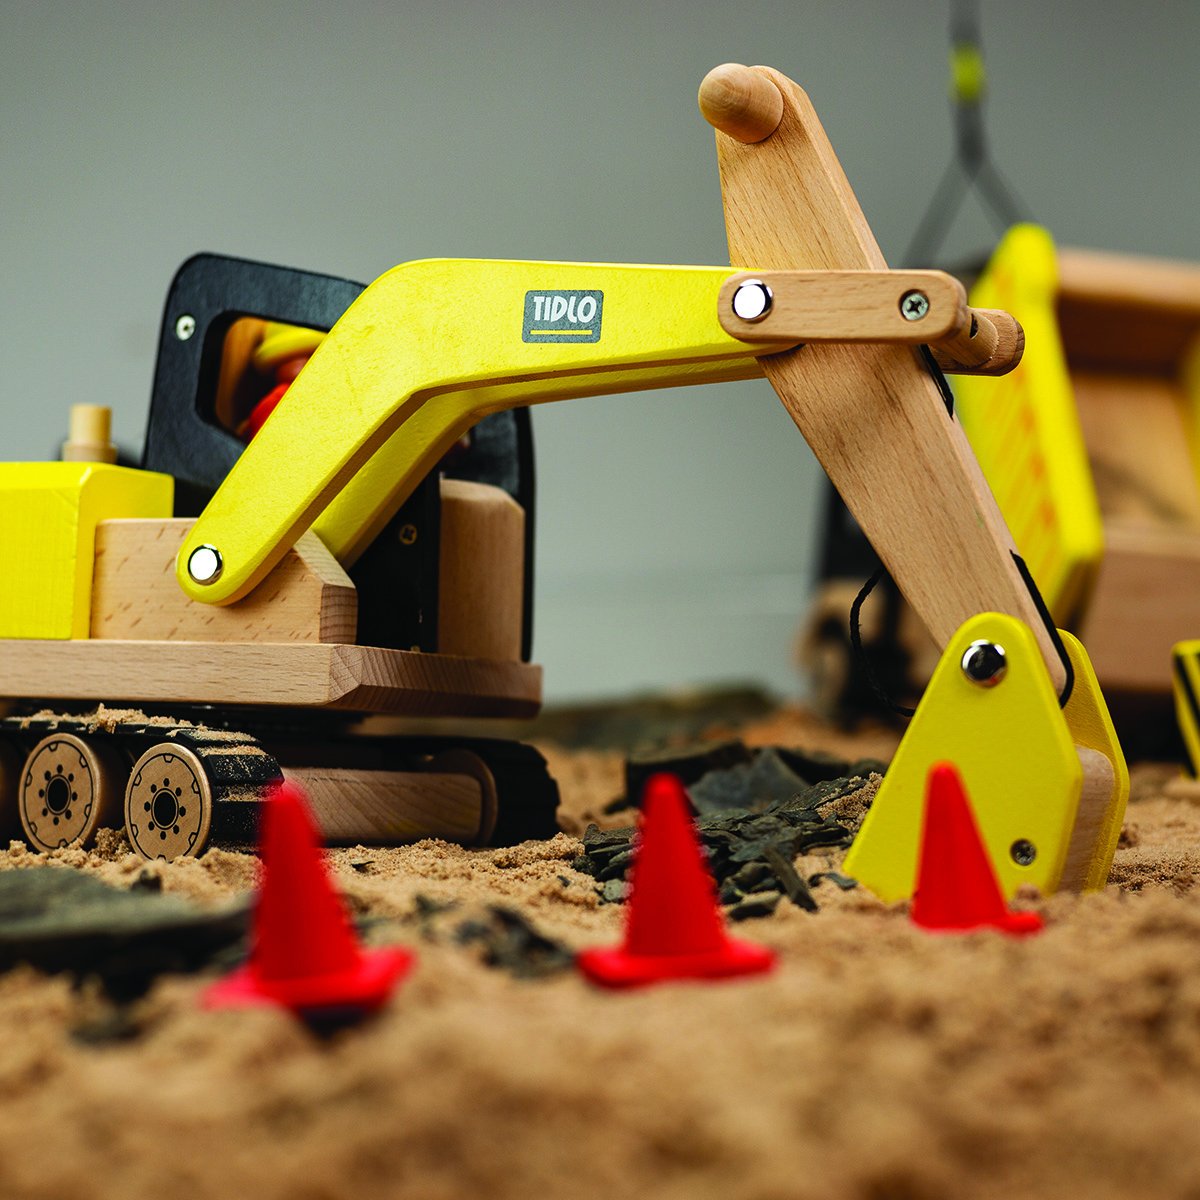 Bigjigs Wooden Digger Toy